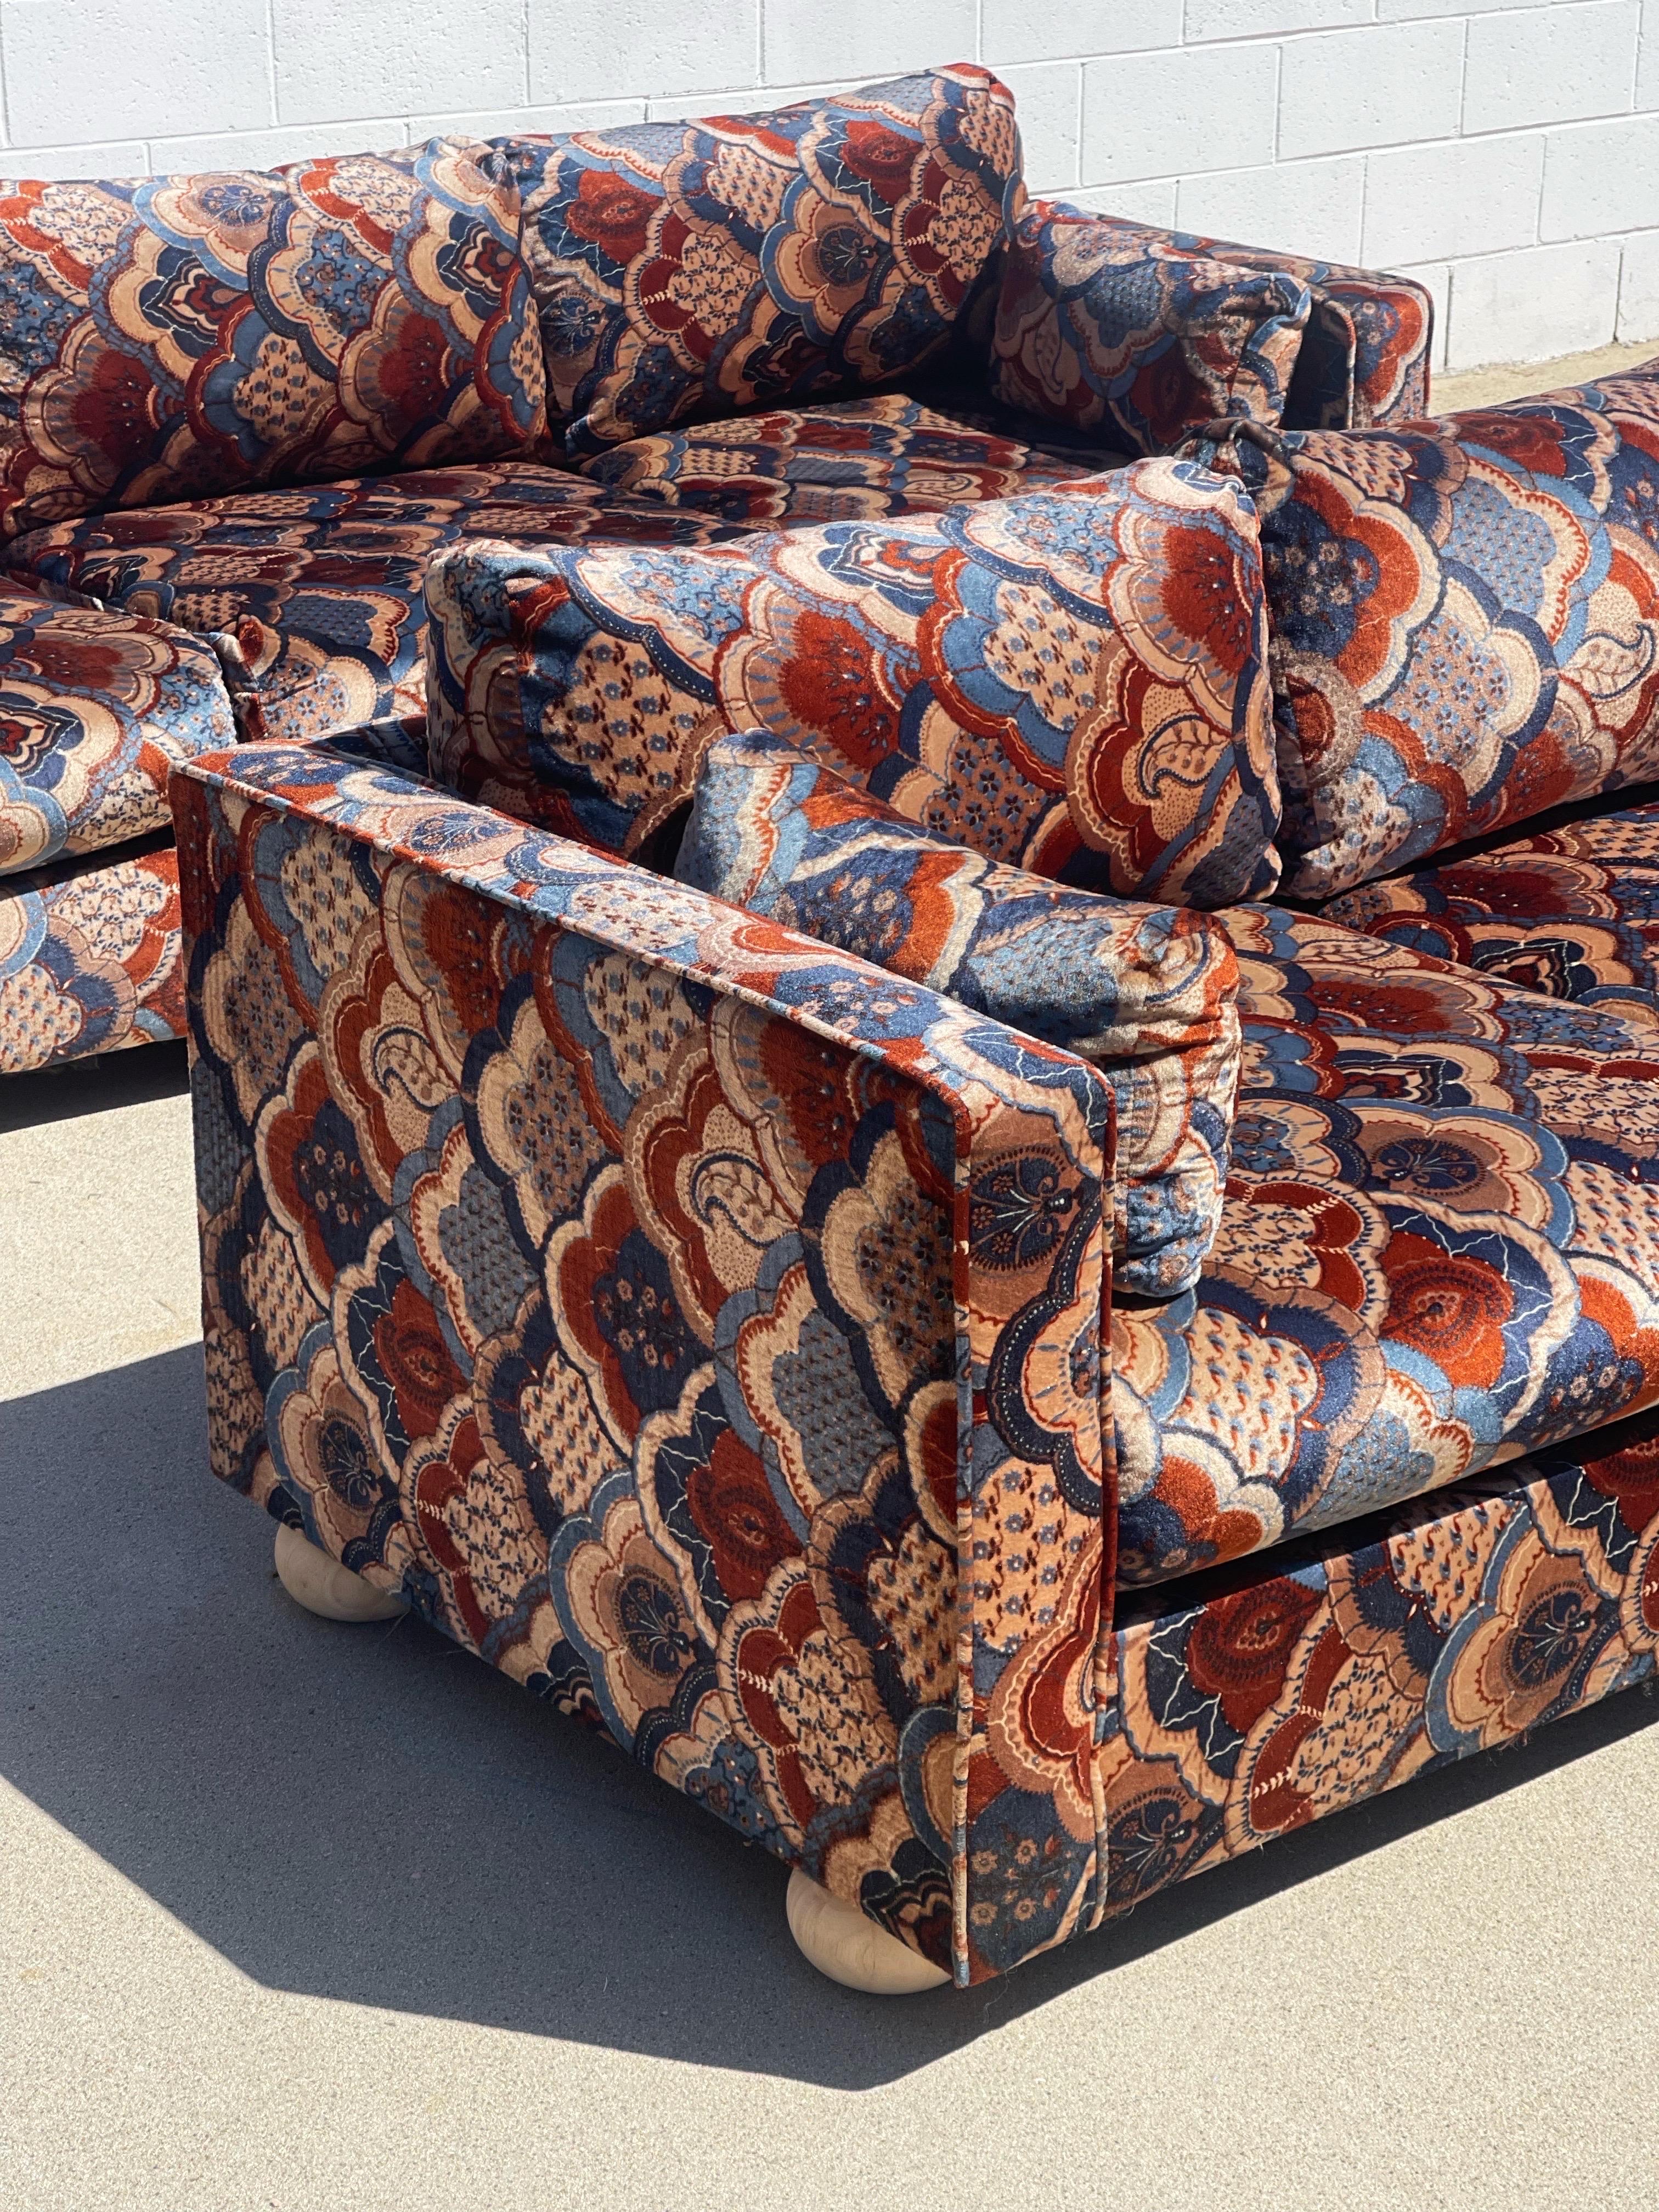 Vintage 1970s Paisley Love Seat Sofa In Good Condition For Sale In Los Angeles, CA